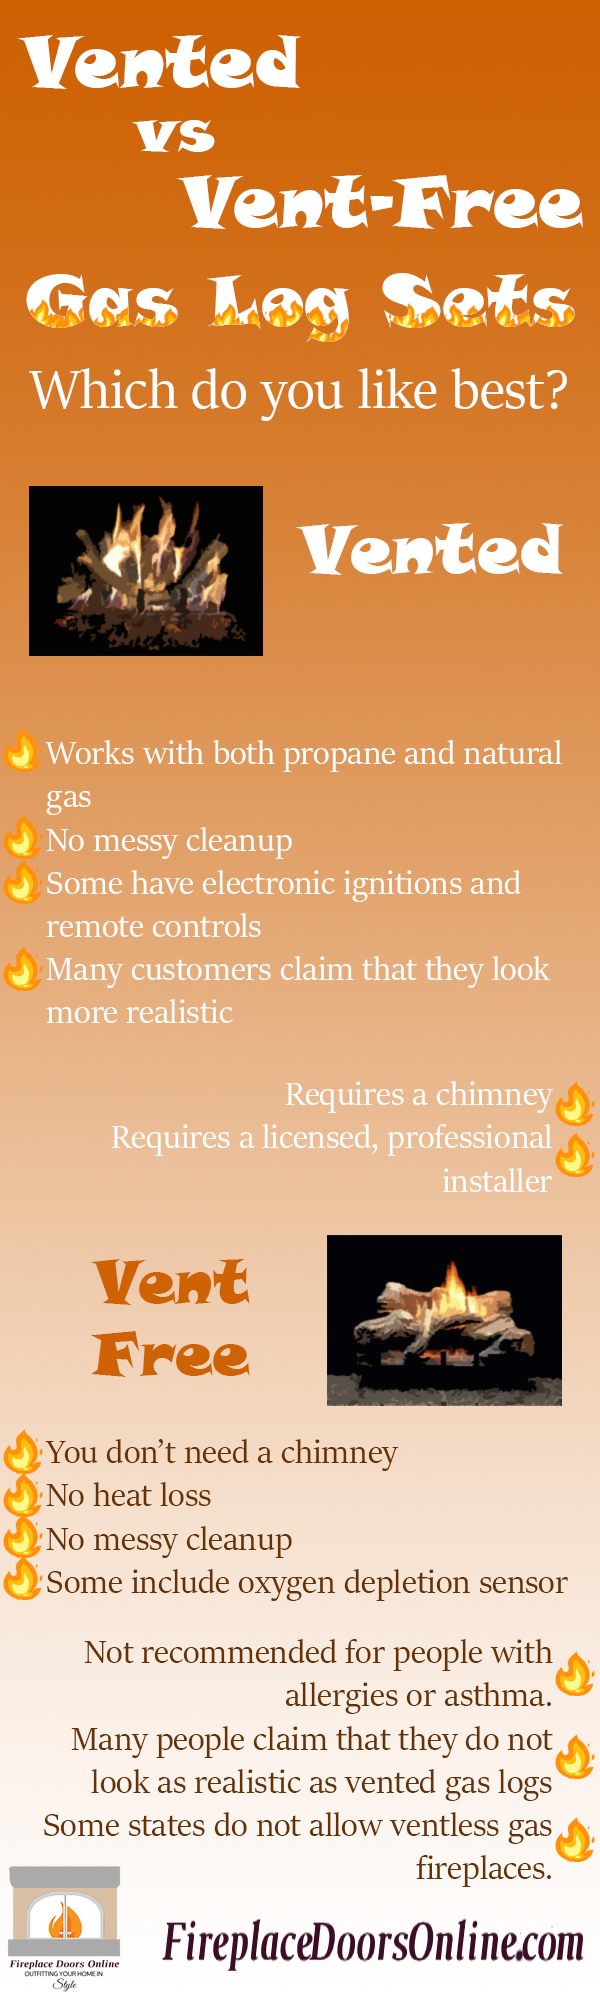 Gas Logs The Log Experts, Vented Or Vent Free Gas Fireplace